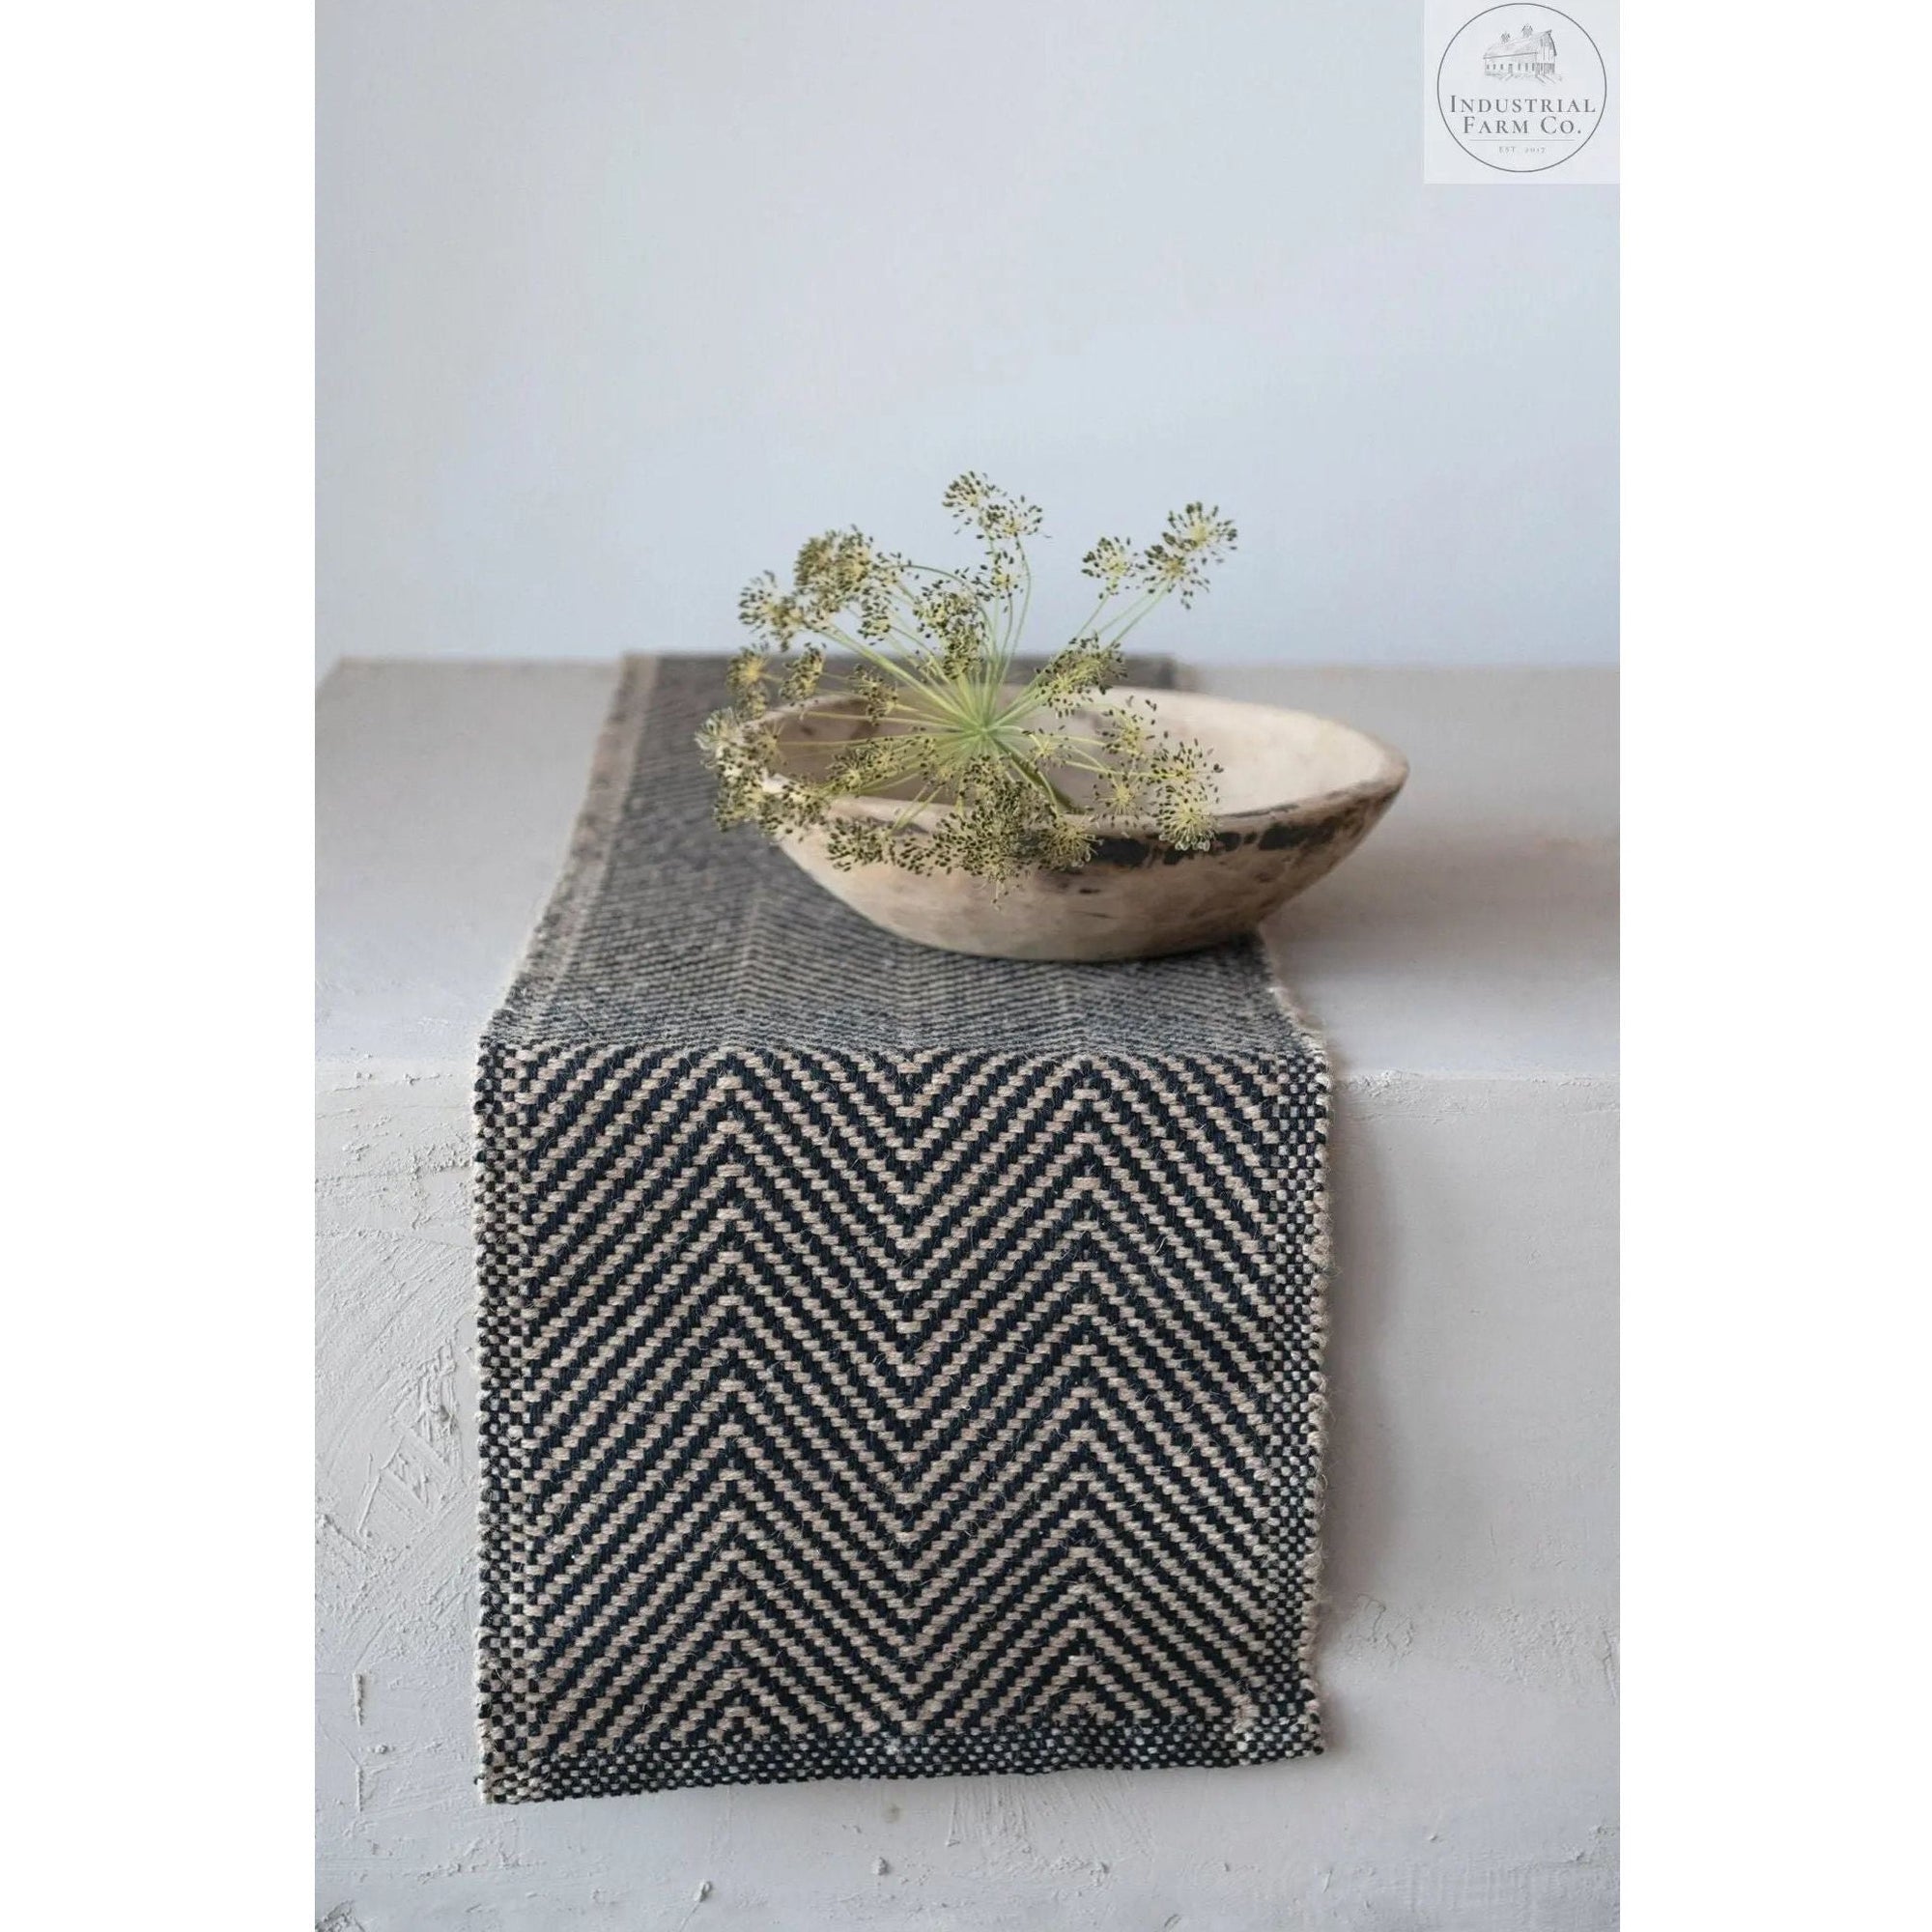 Gather Around Jute Table Runner     | Industrial Farm Co